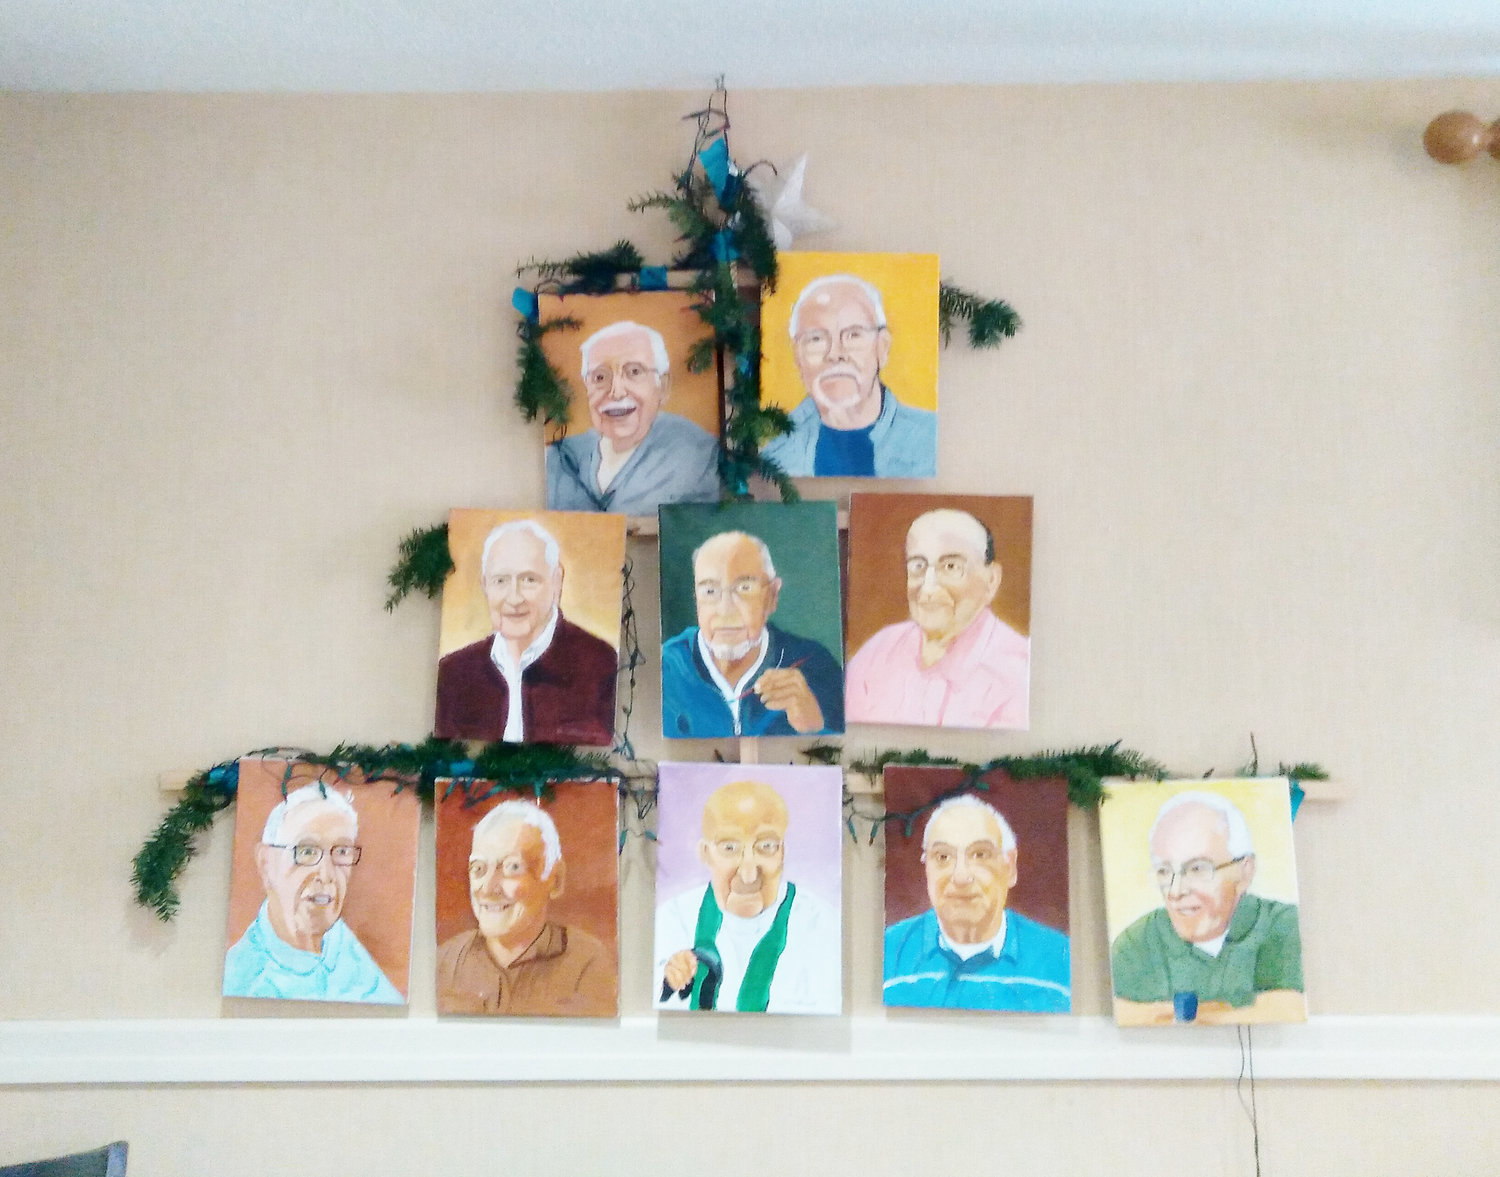 On Christmas Eve, Father Ray Tetrault gave the gift of his art to nine fellow senior priests at the St. John Vianney Residence. The artist is pictured in a self-portrait at the center of 10 paintings arranged on the wall of the residence before he presented his surprise works of art to his brother retired priests for Christmas.